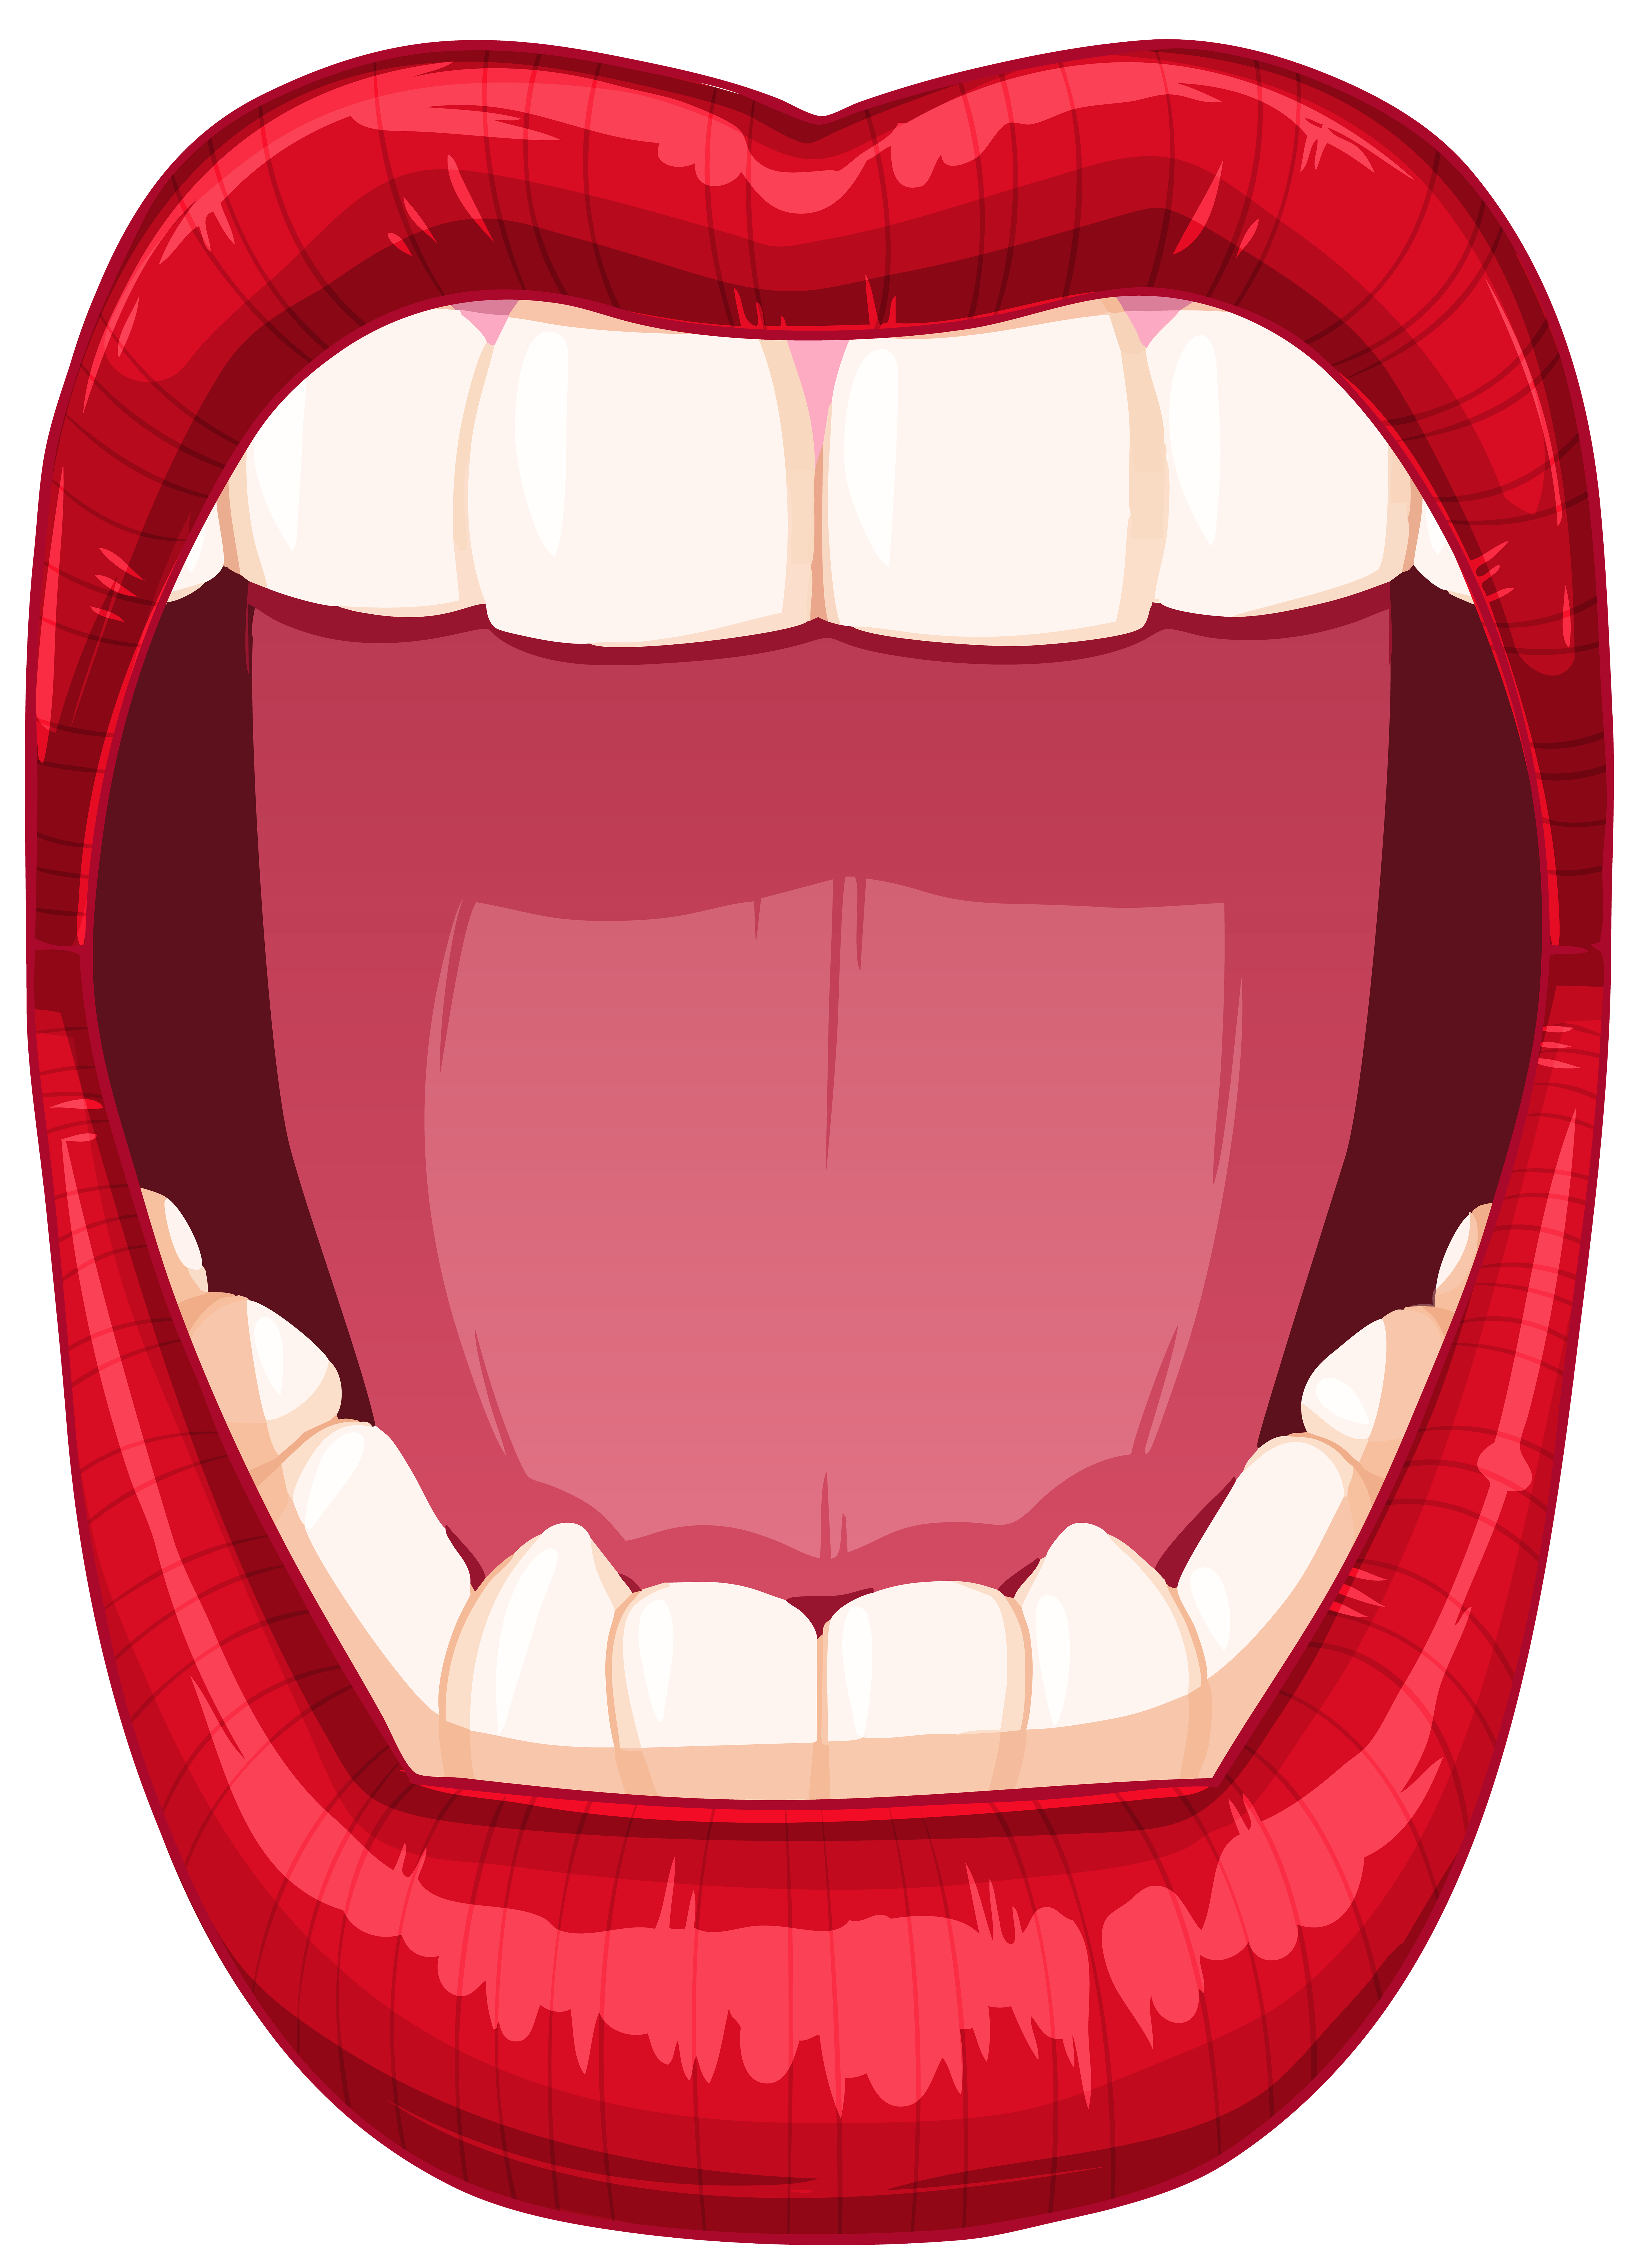 Clipart mouth healthy mouth. Open clip art net